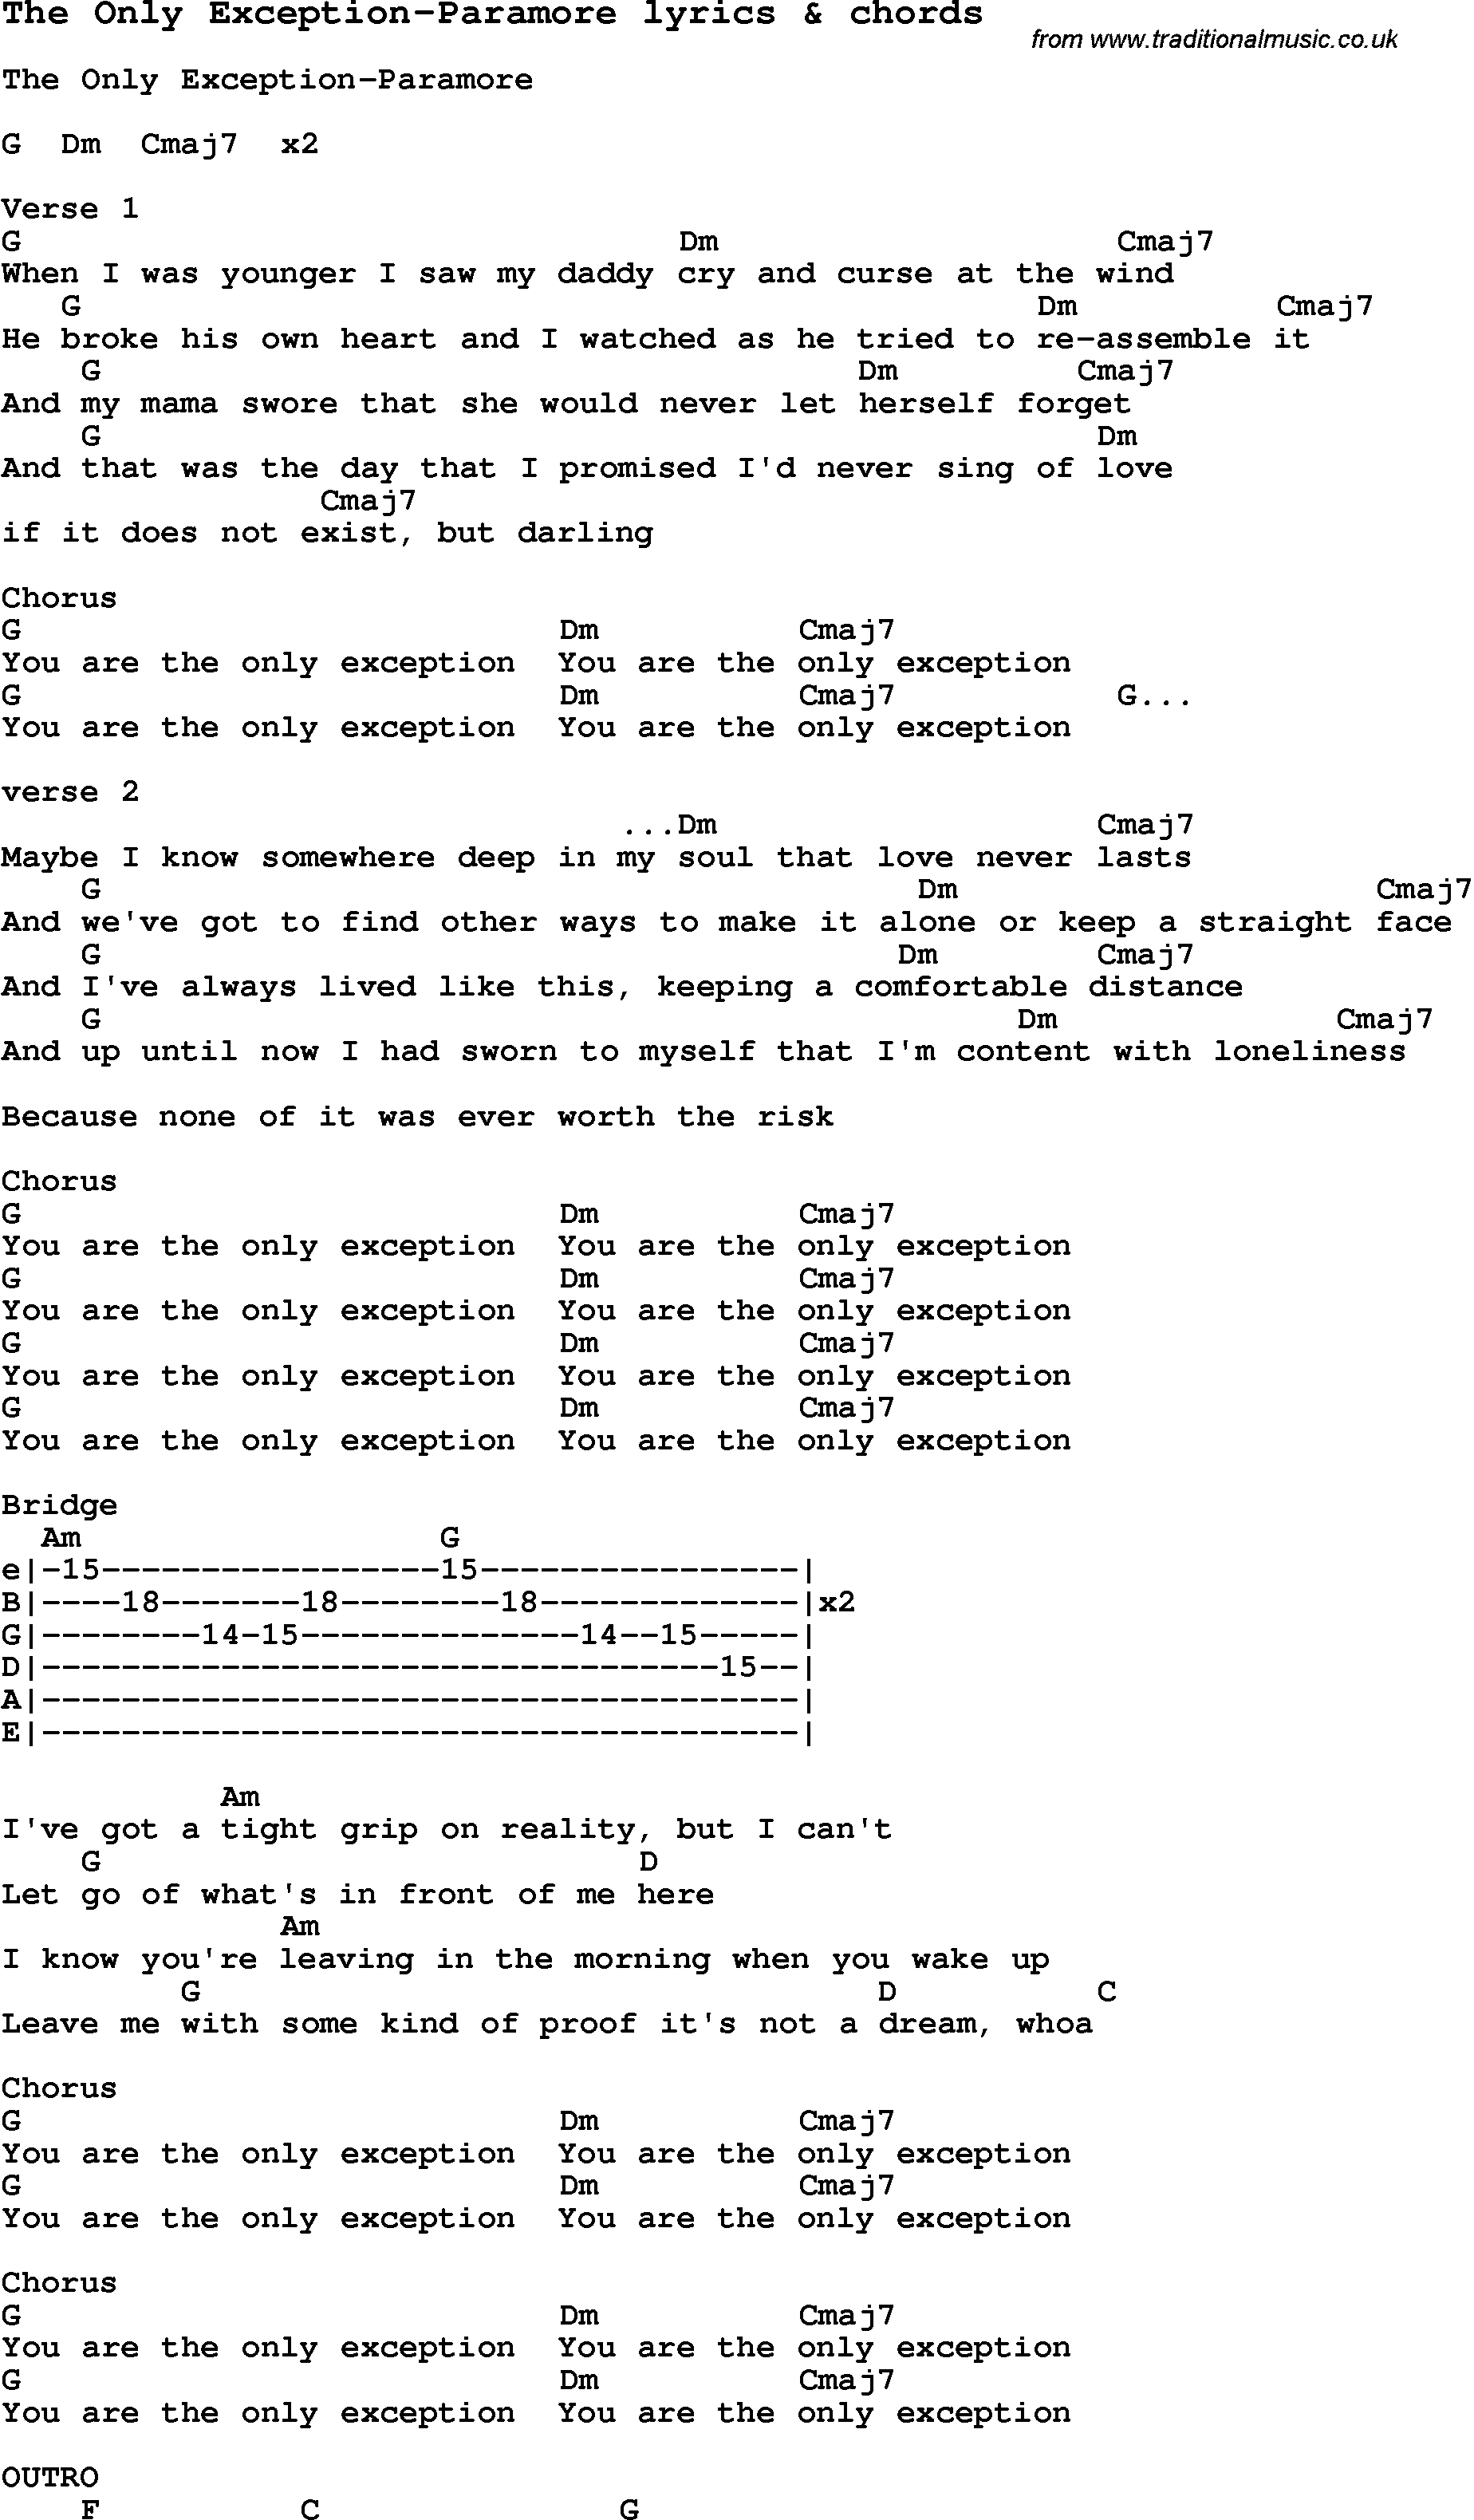 The Only Exception Chords Love Song Lyrics Forthe Only Exception Paramore With Chords